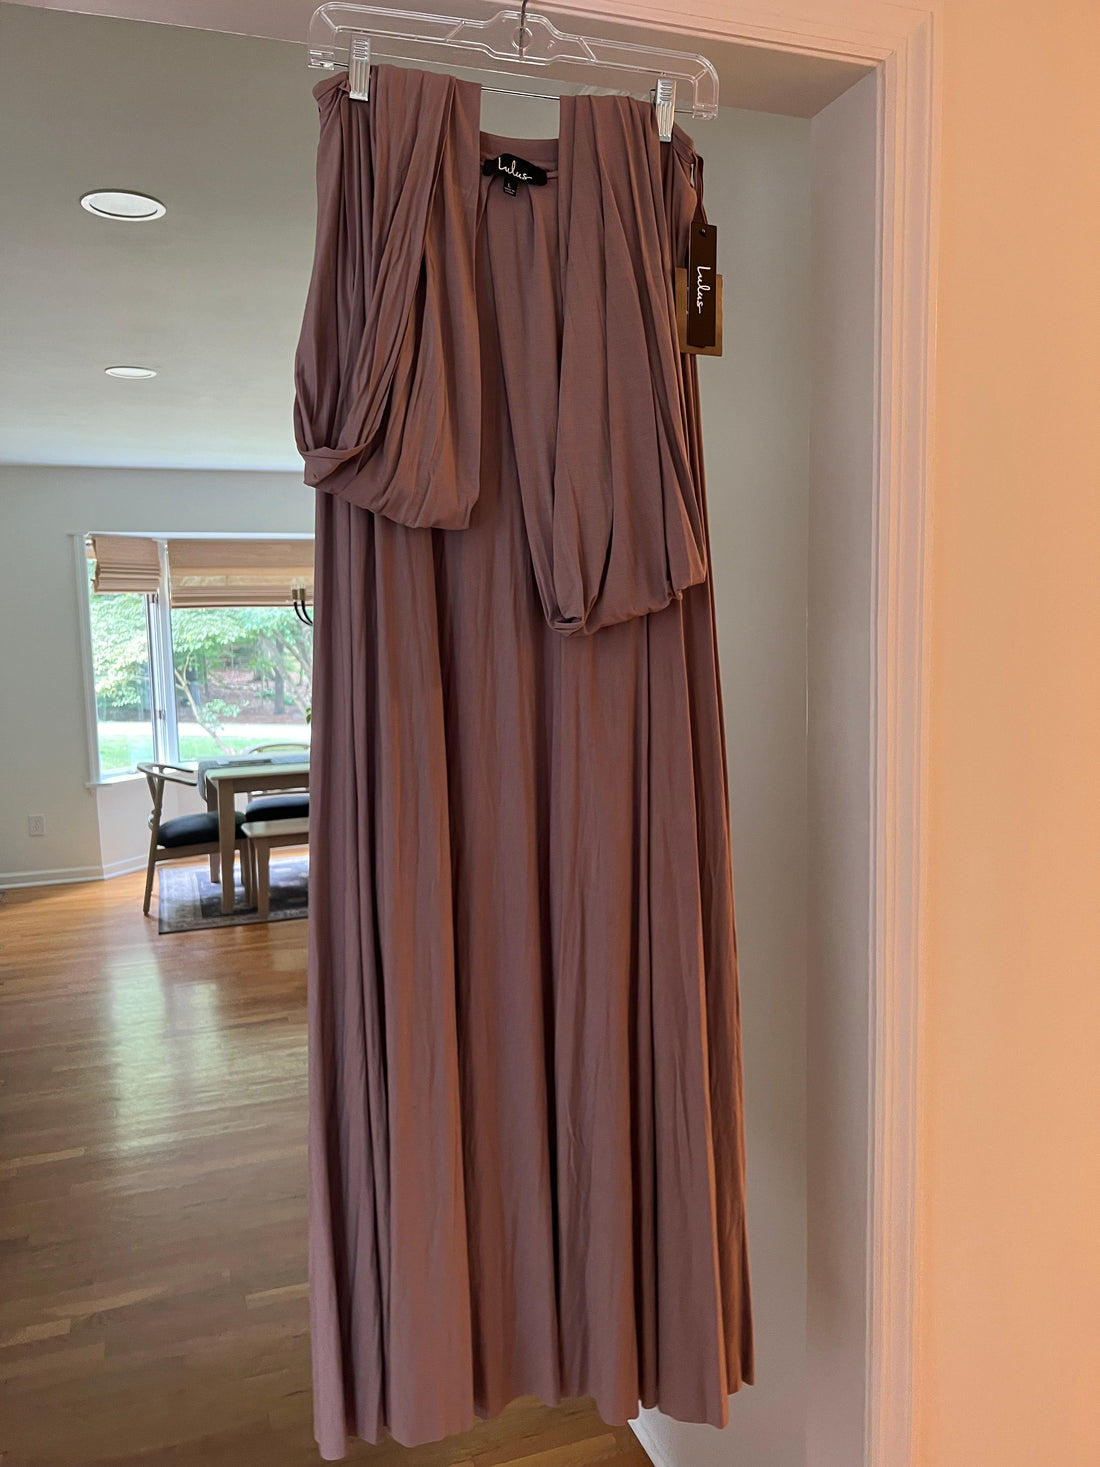 Lulus Tricks of the Trade Taupe Convertible Maxi Dress - L